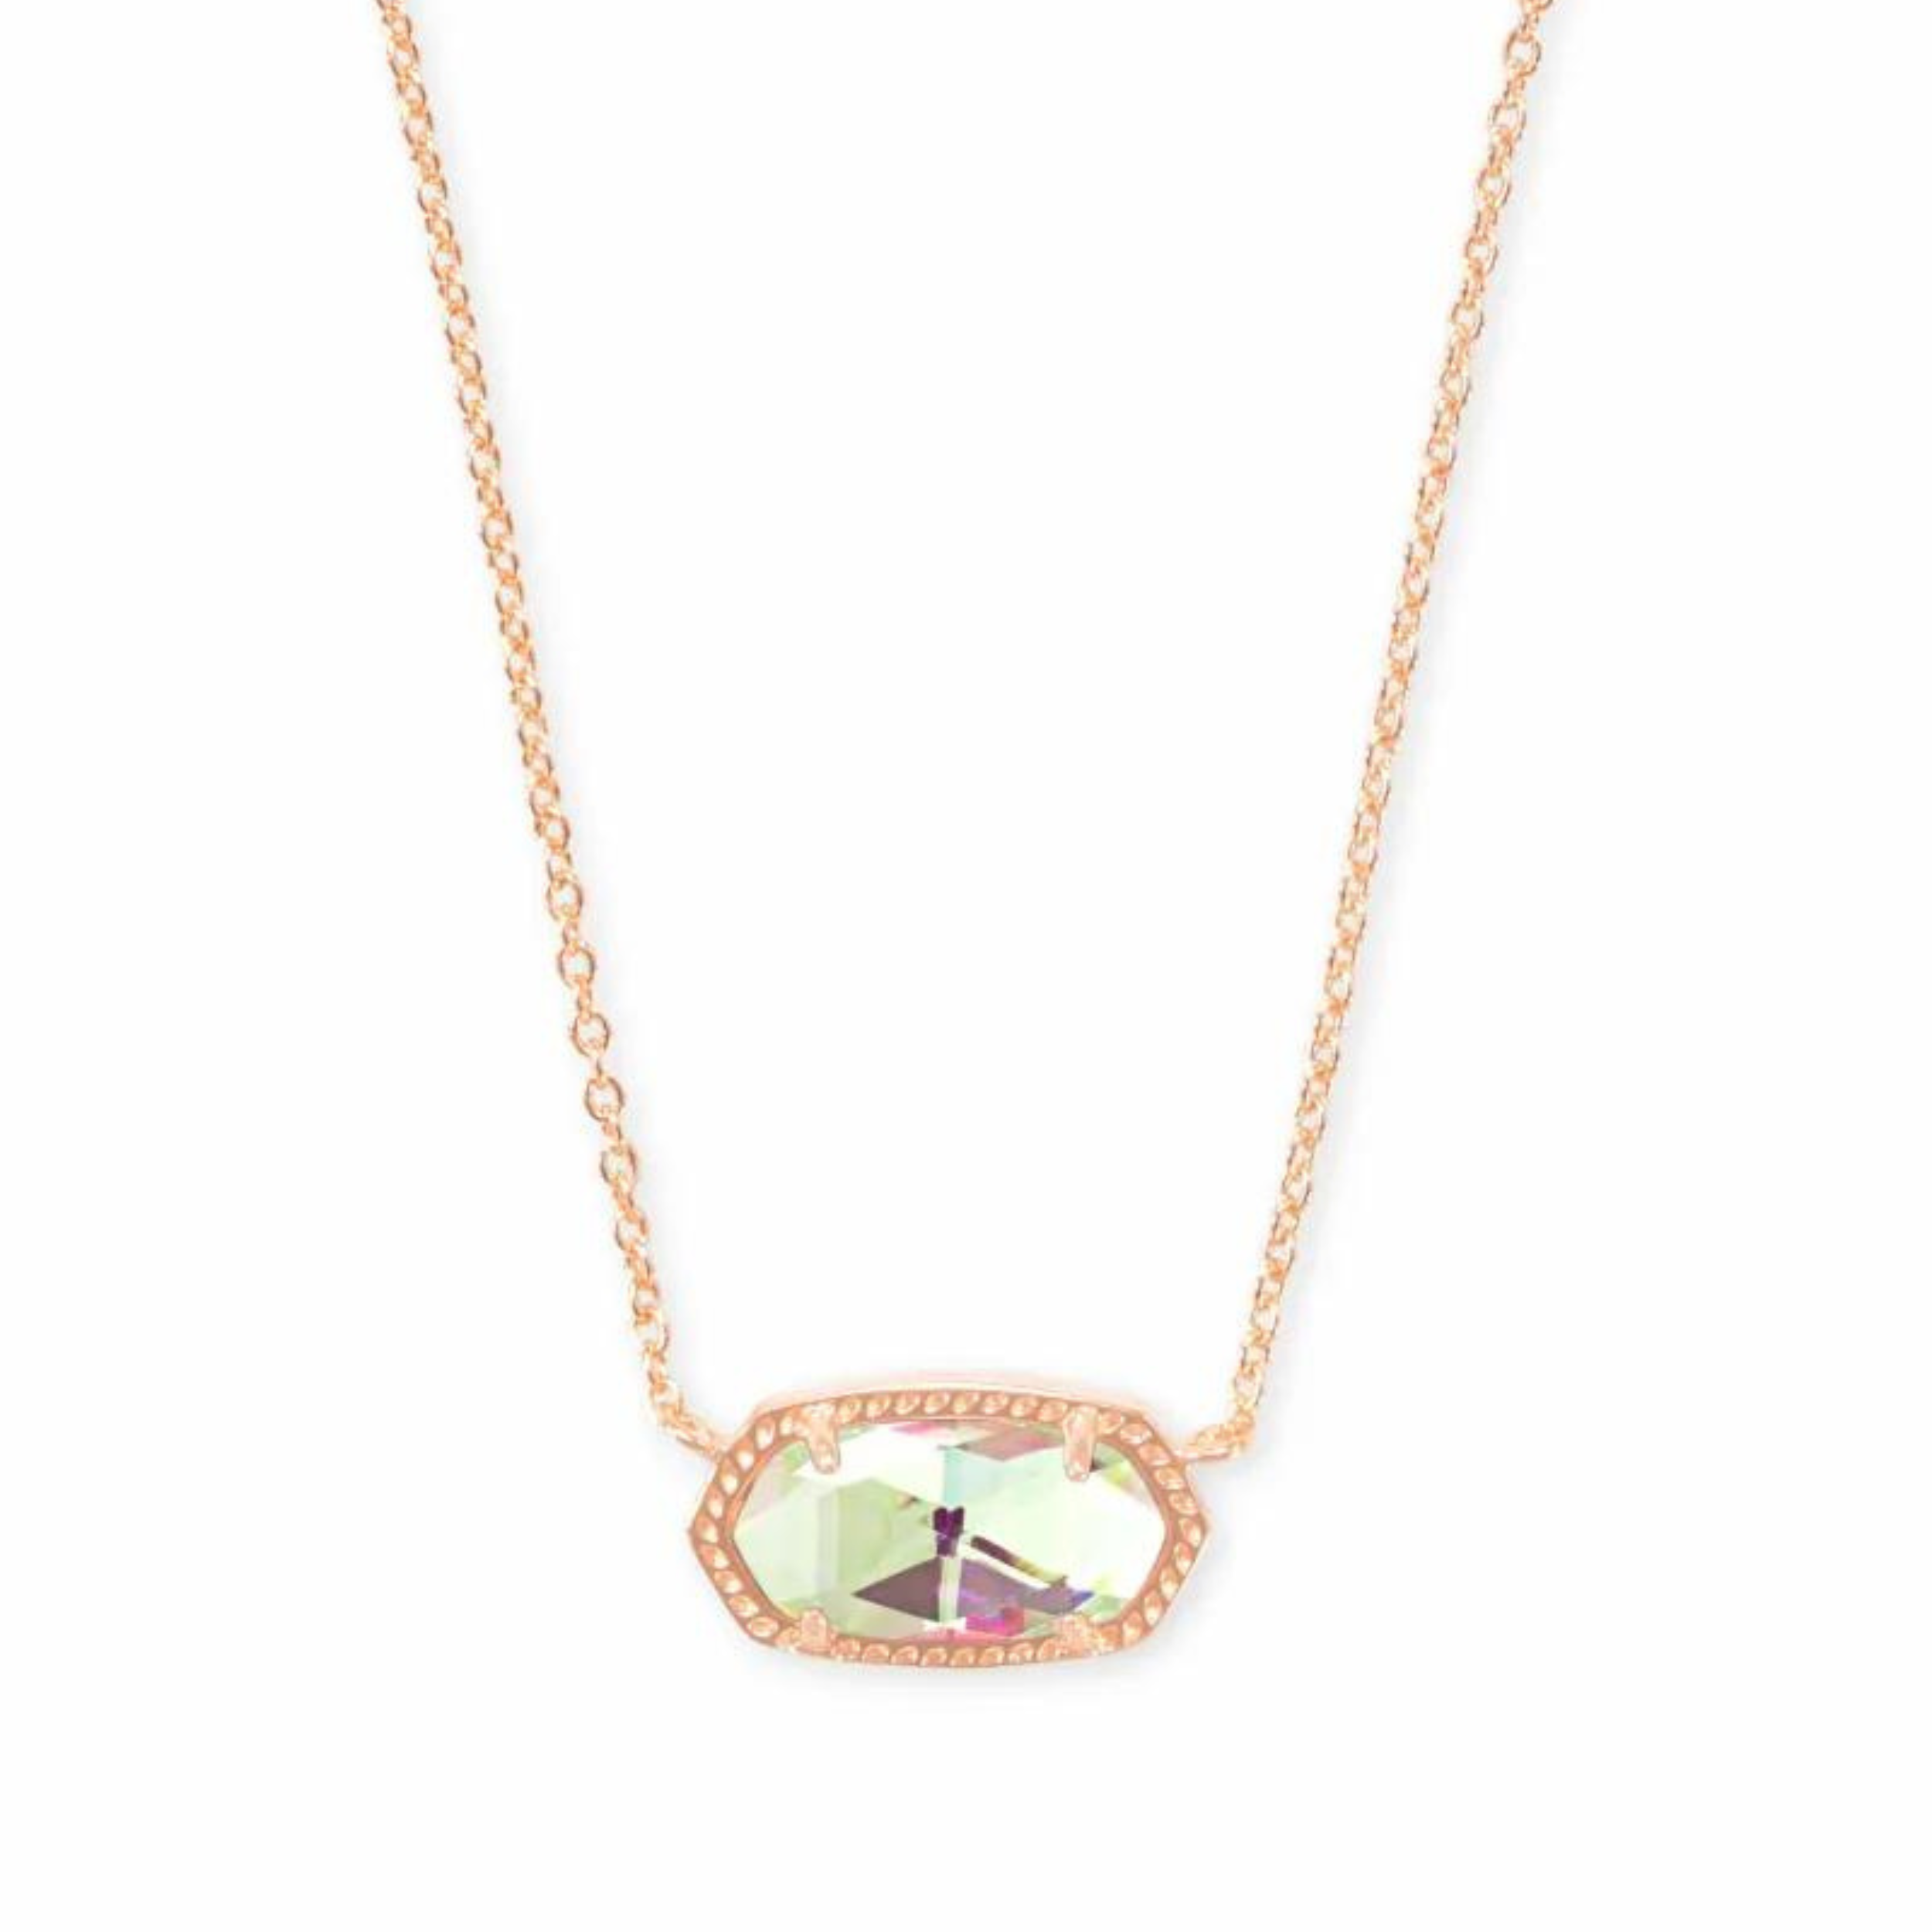 Rose gold pendant necklace with dichoric glass stone, pictured on a white background.